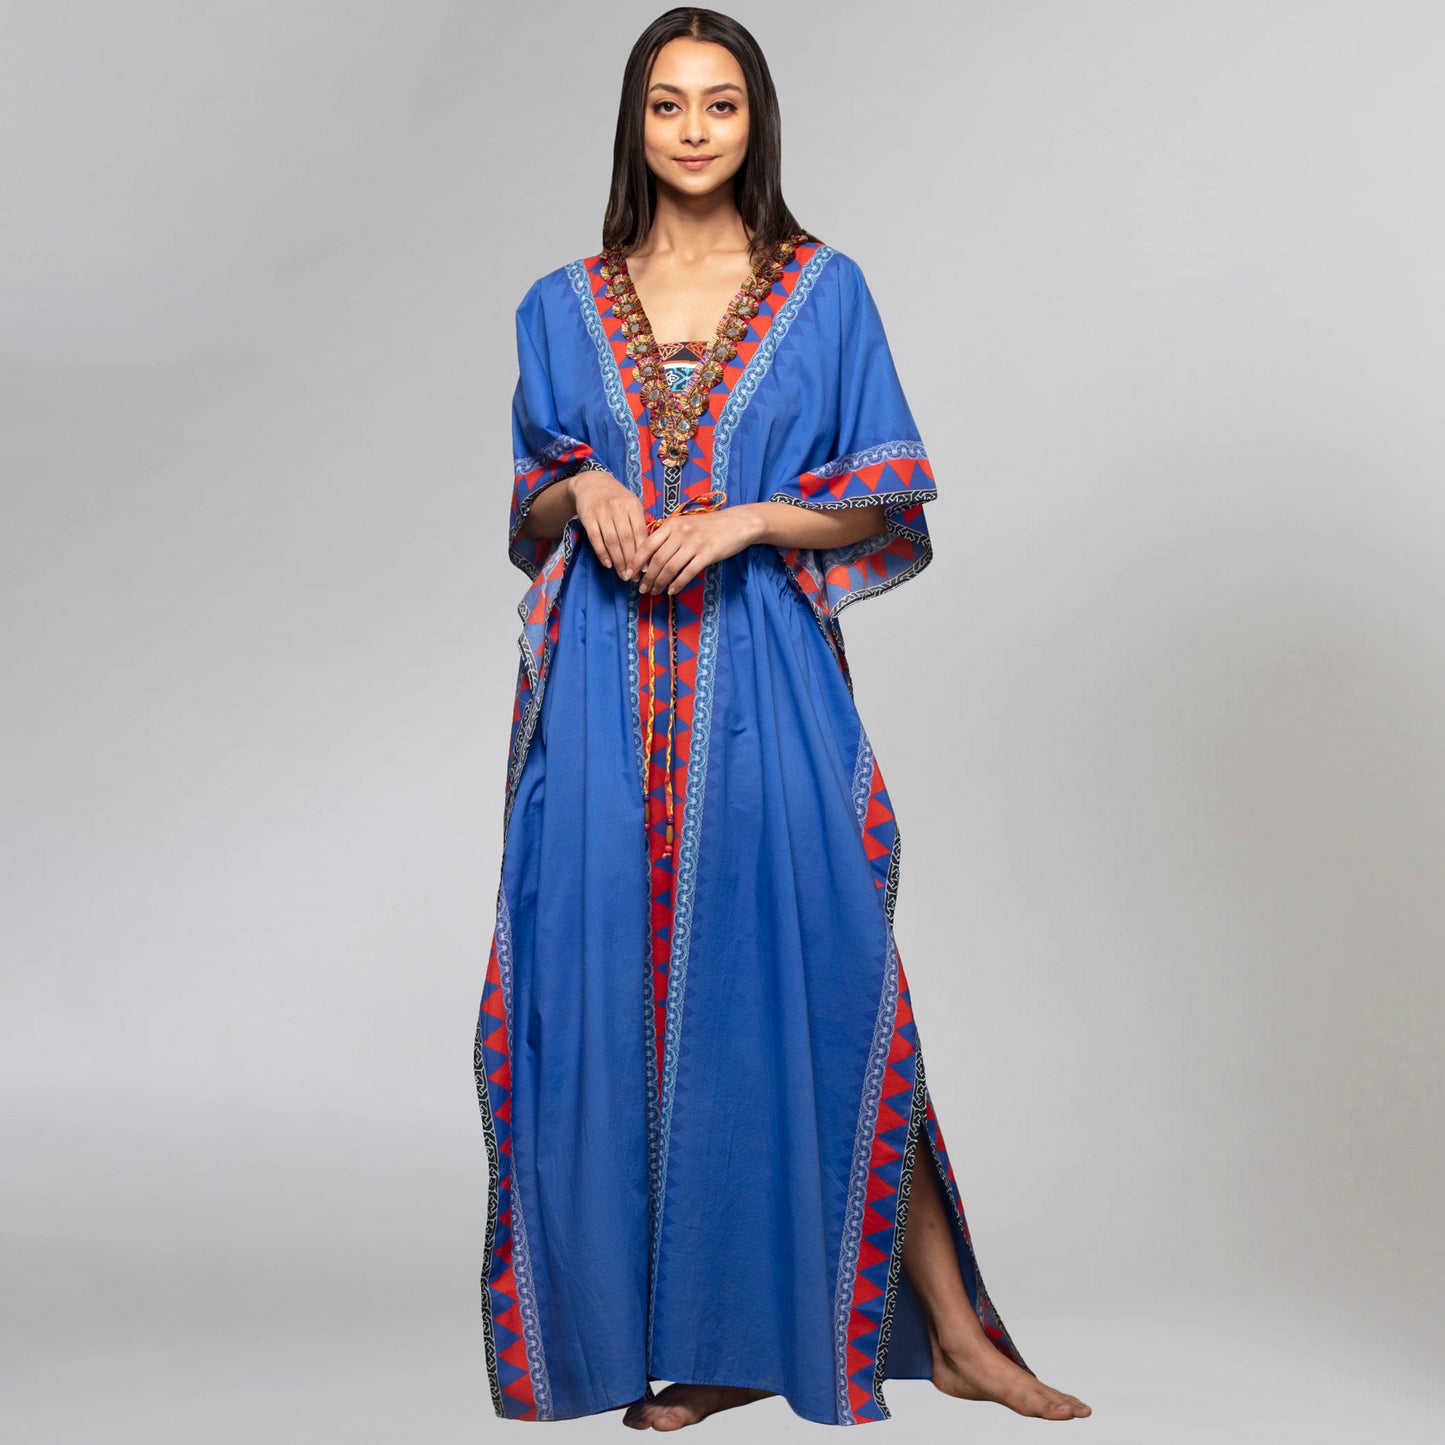 Blue Tribal Full Length Kaftan with Mirror Lace